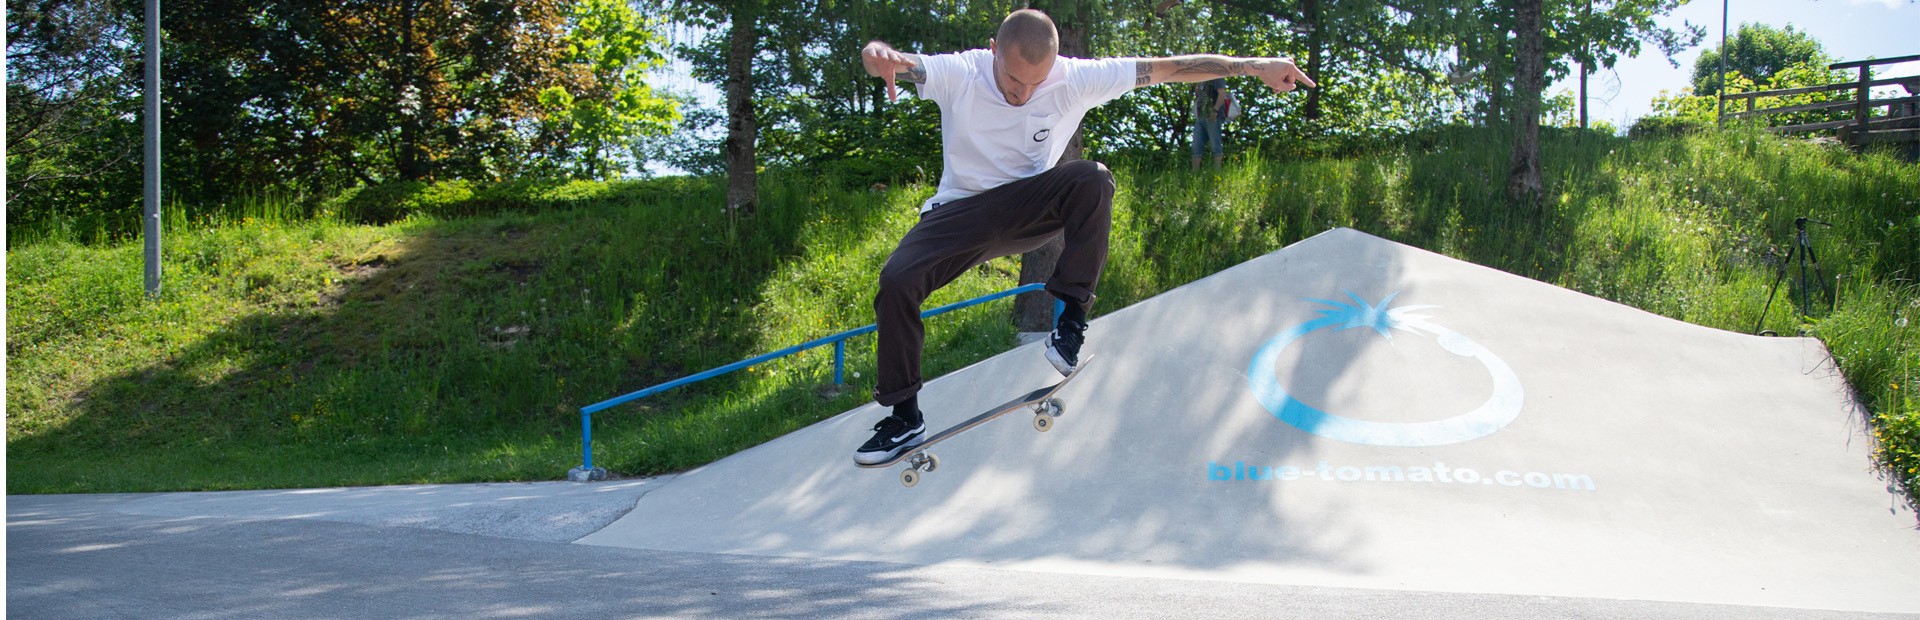 Marco Kada shows you how to ollie